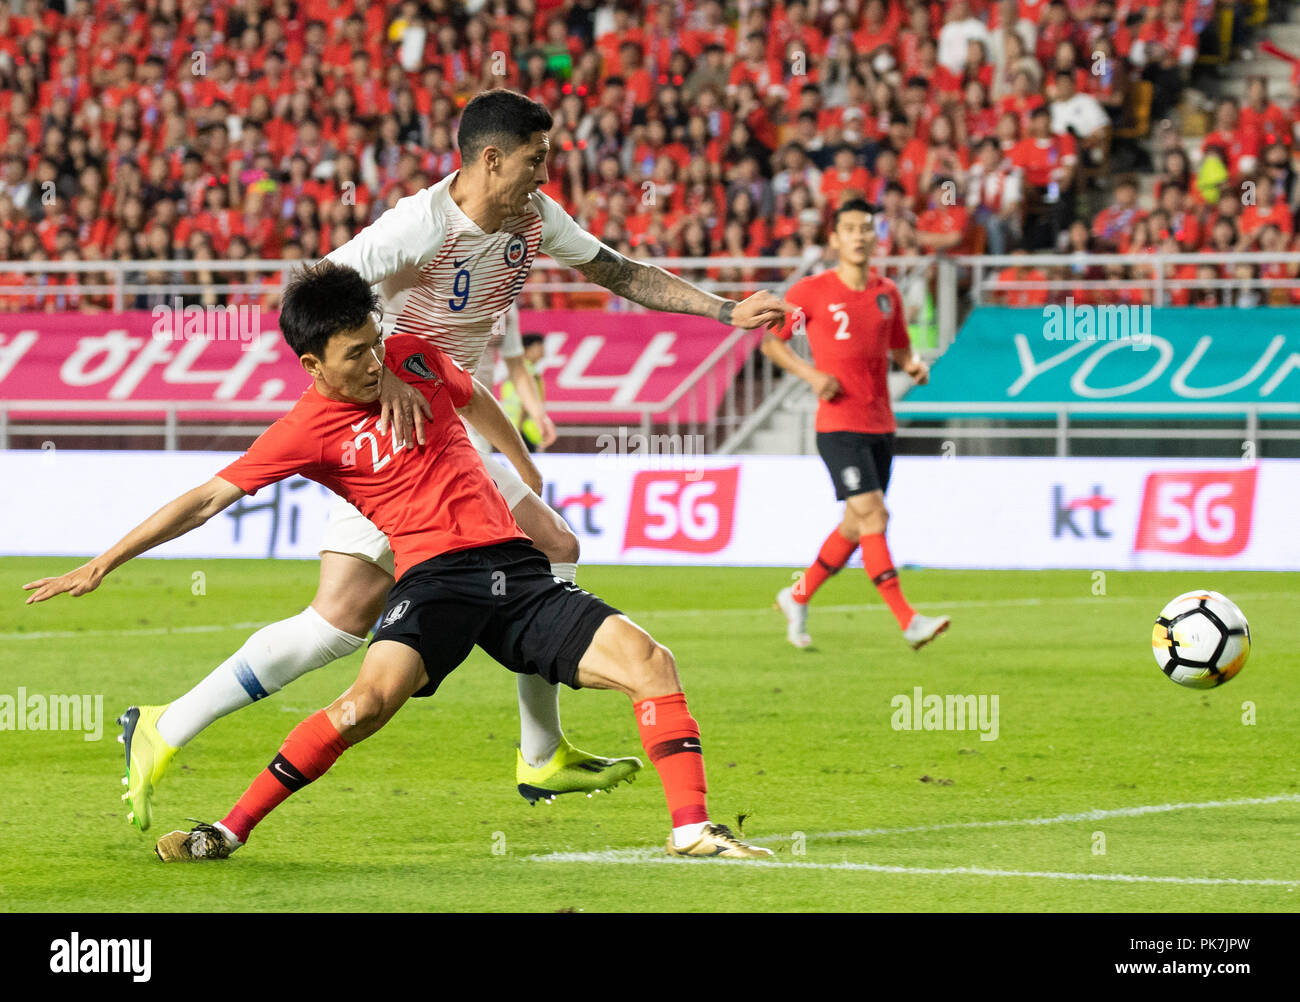 Suwon, South Korea. 11th Sep, 2018. Hwang Inbeom (L) of South Korea vies with Pedro Hernandez of Chile during a friendly soccer match between South Korea and Chile at Suwon World Cup Stadium in Suwon, South Korea, on Sept. 11, 2018. The match ended with a 0-0 draw. Credit: Lee Sang-ho/Xinhua/Alamy Live News Stock Photo